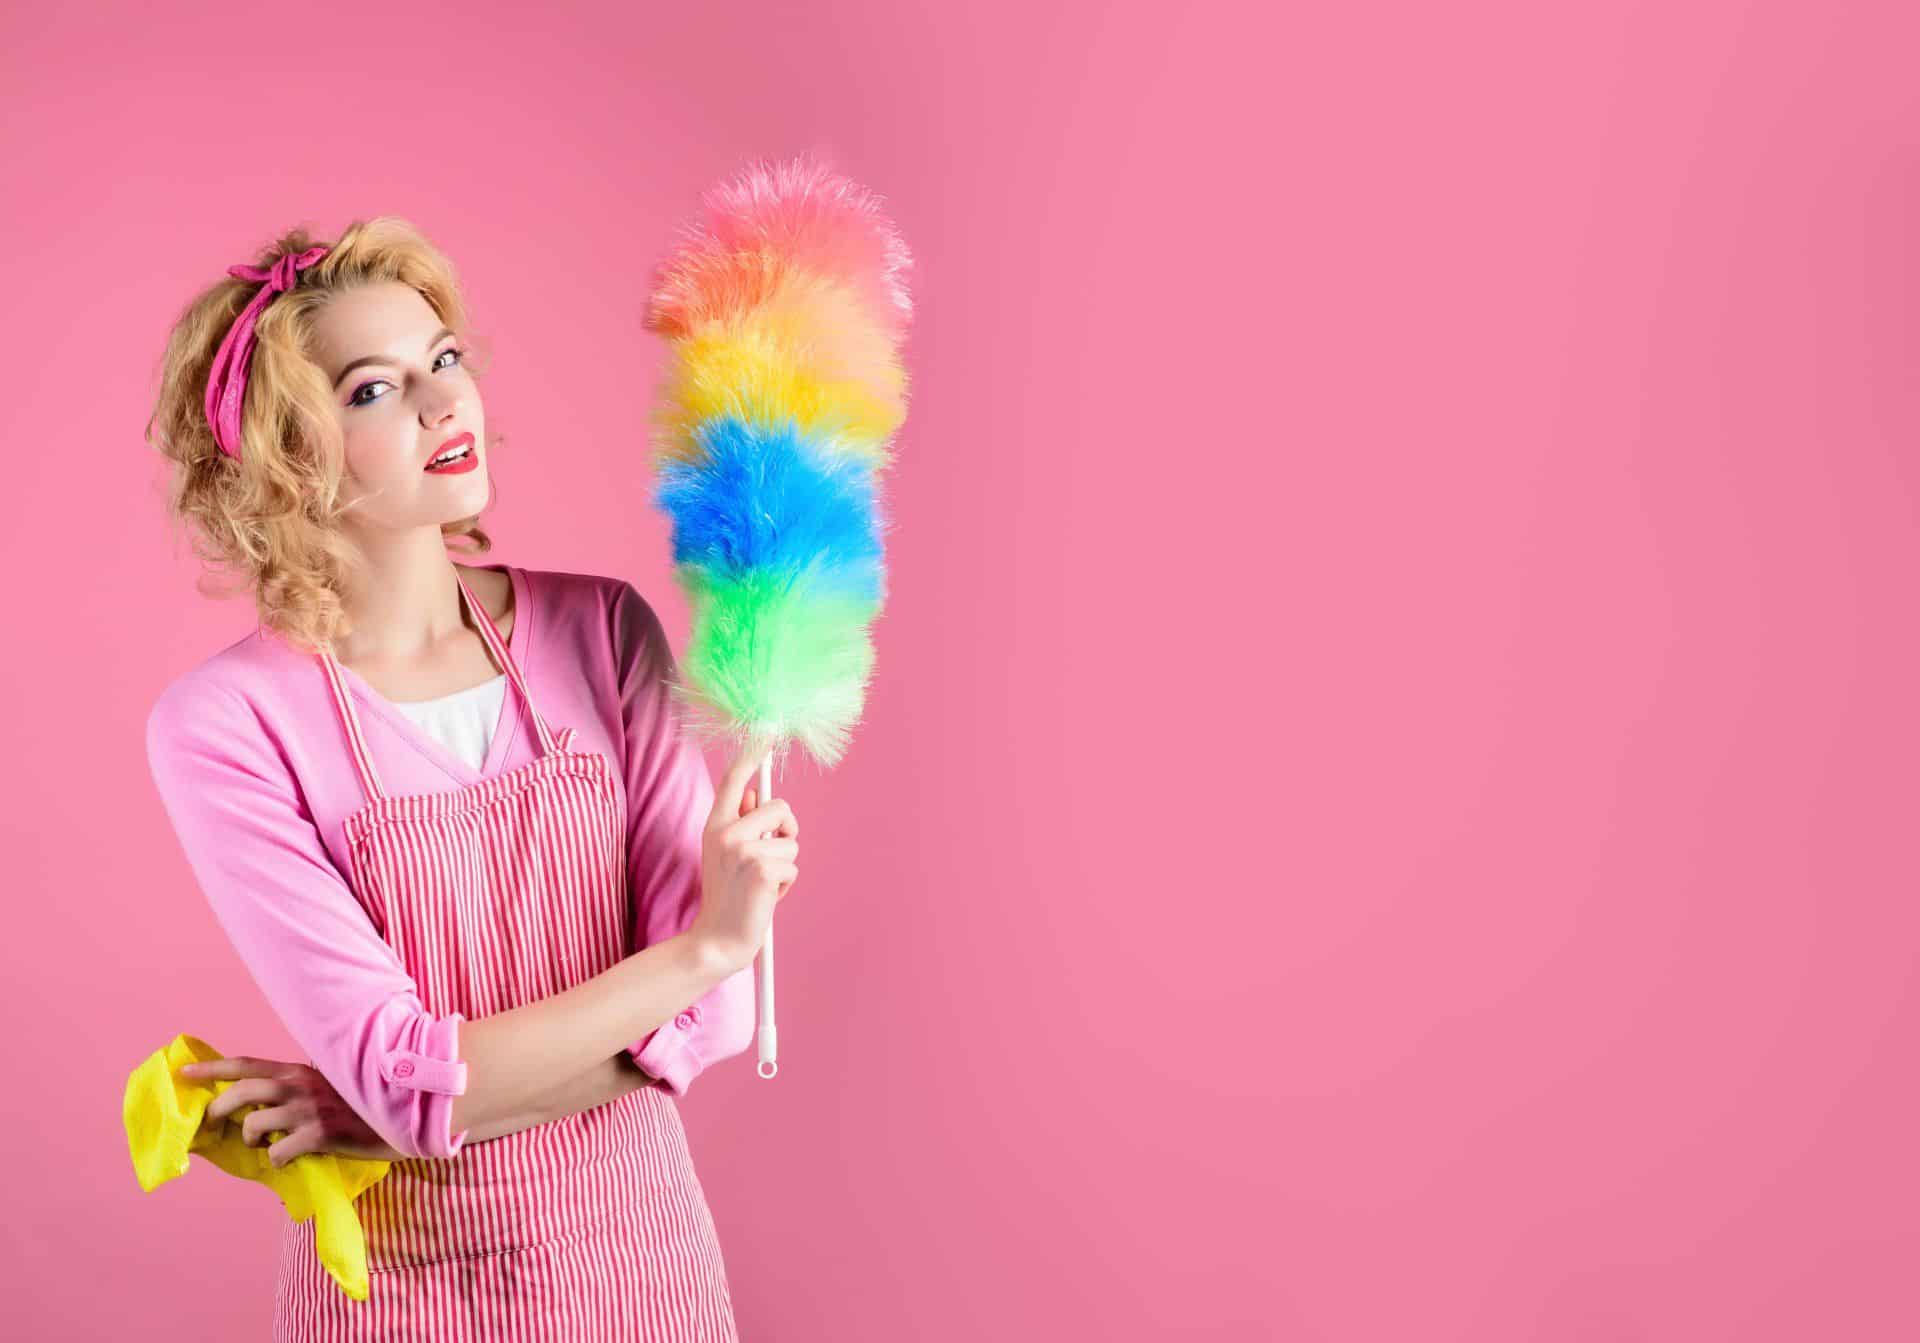 woman dressed in pink holding a rainbow colored feather duster